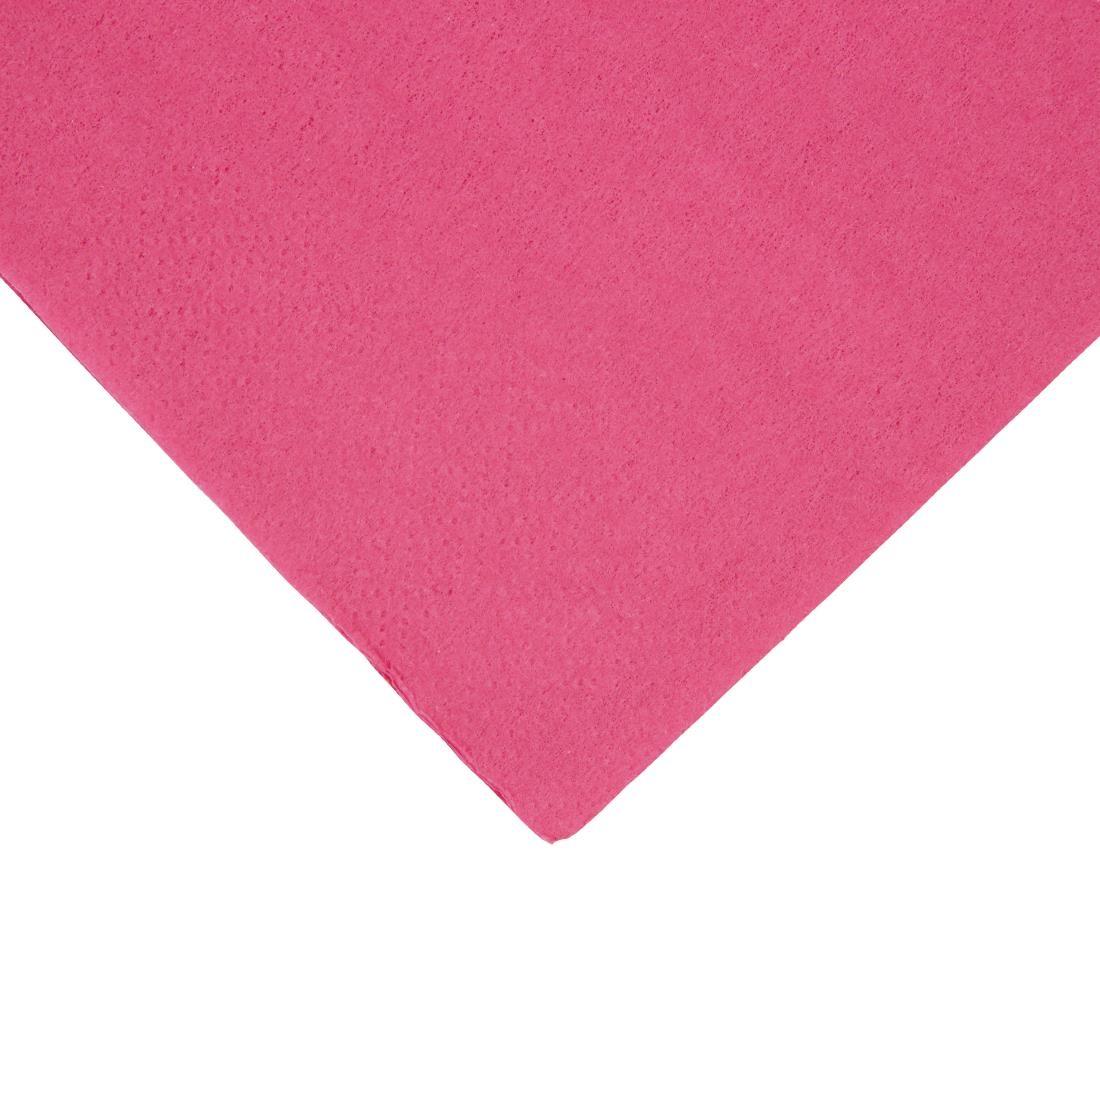 Fiesta Recyclable Dinner Napkin Pink 40x40cm 2ply 1/8 Fold (Pack of 2000) - FE246  - 2